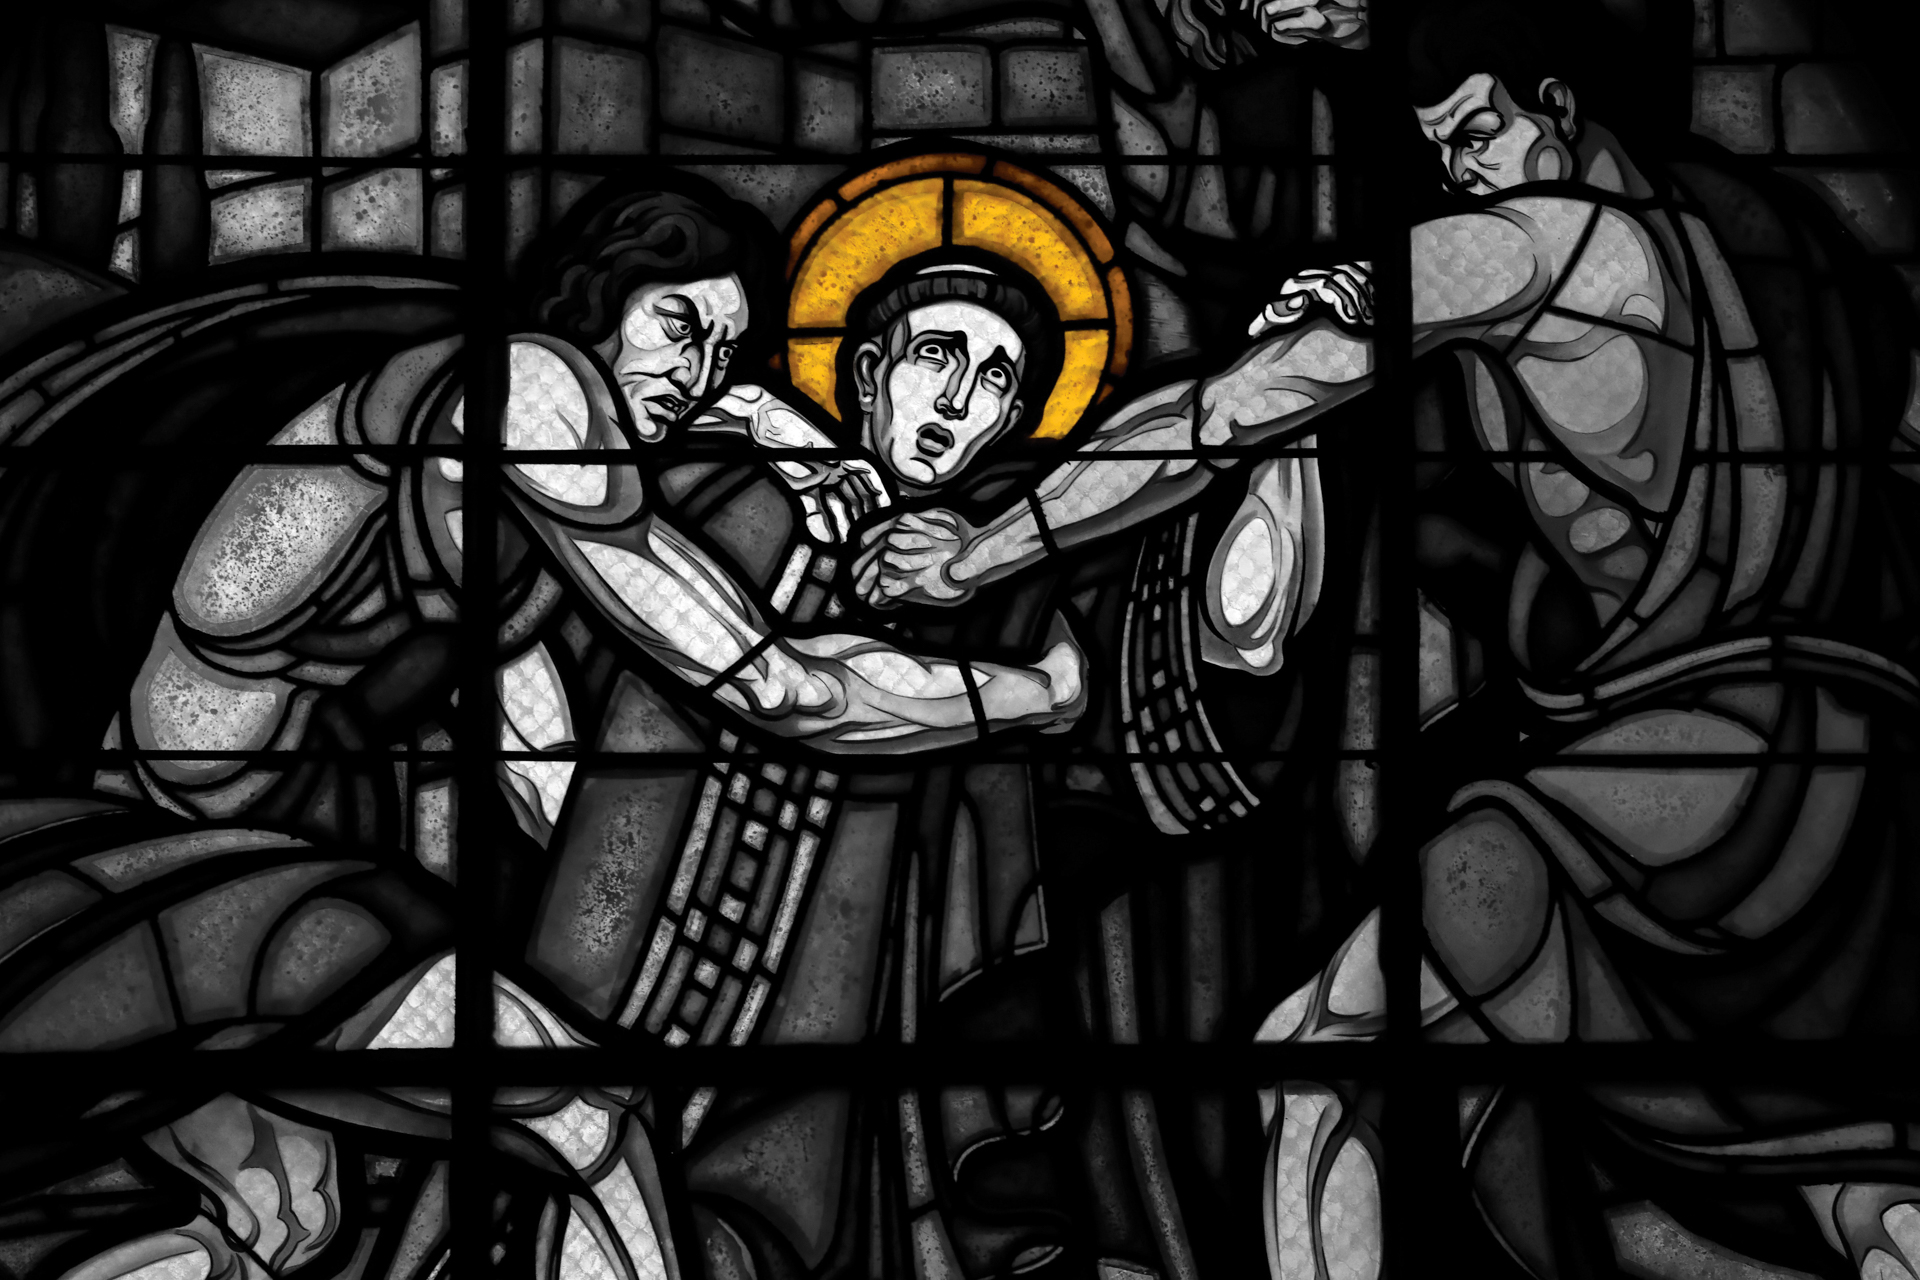 Stained glass depiction of Stephen, the first of the martyrs